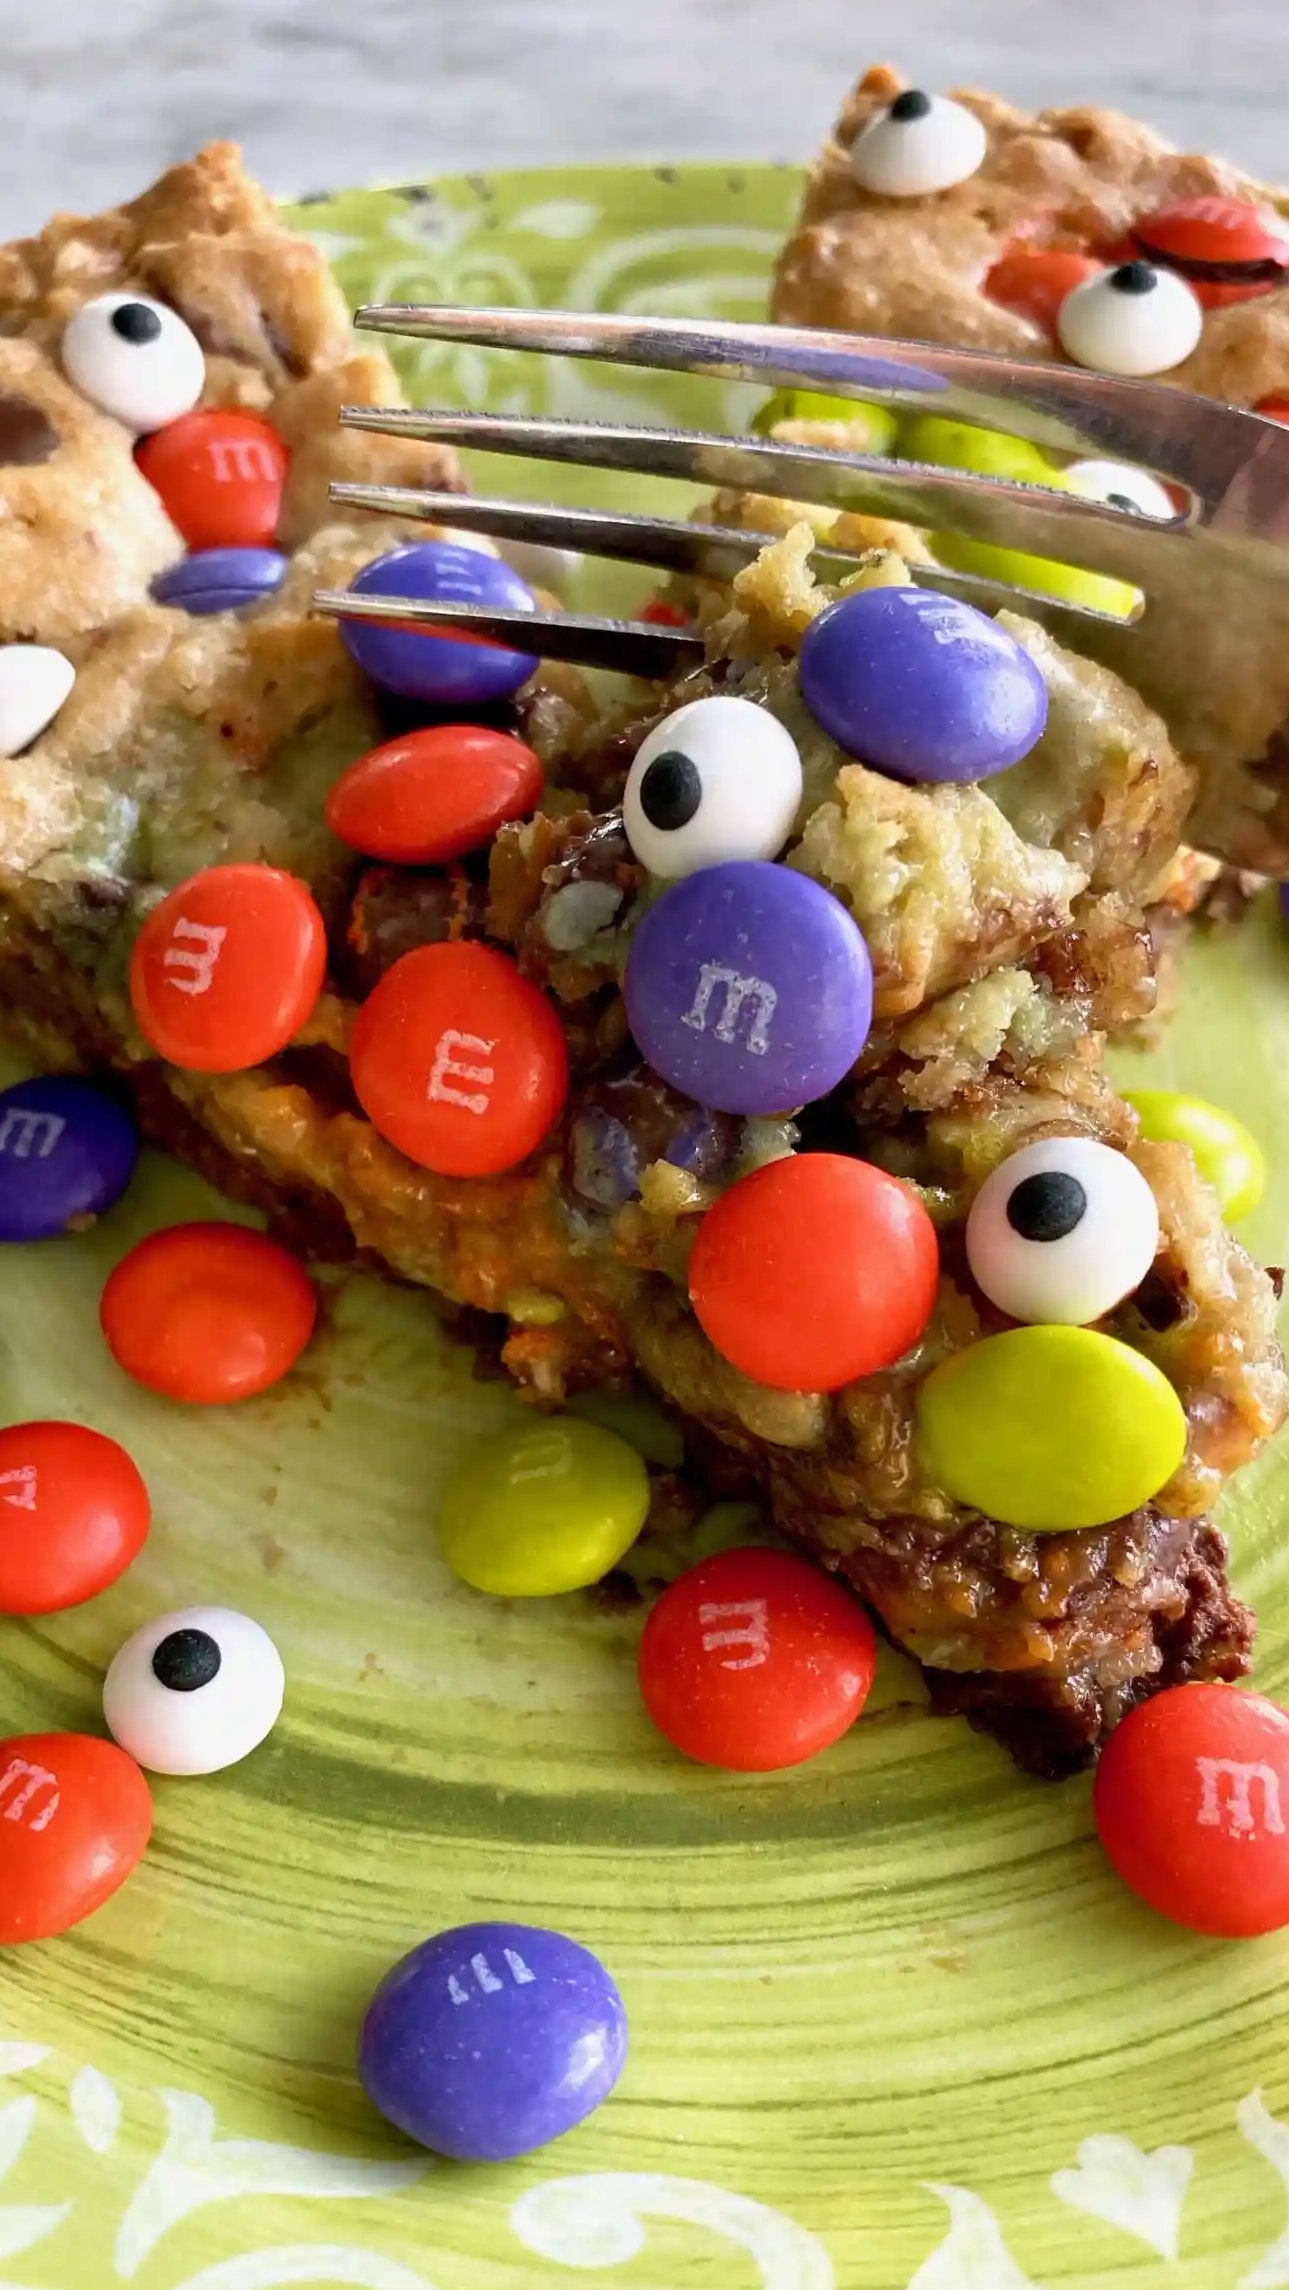 Goblin skillet cookie is a ‘yummy mess’ for Halloween: Try the recipe